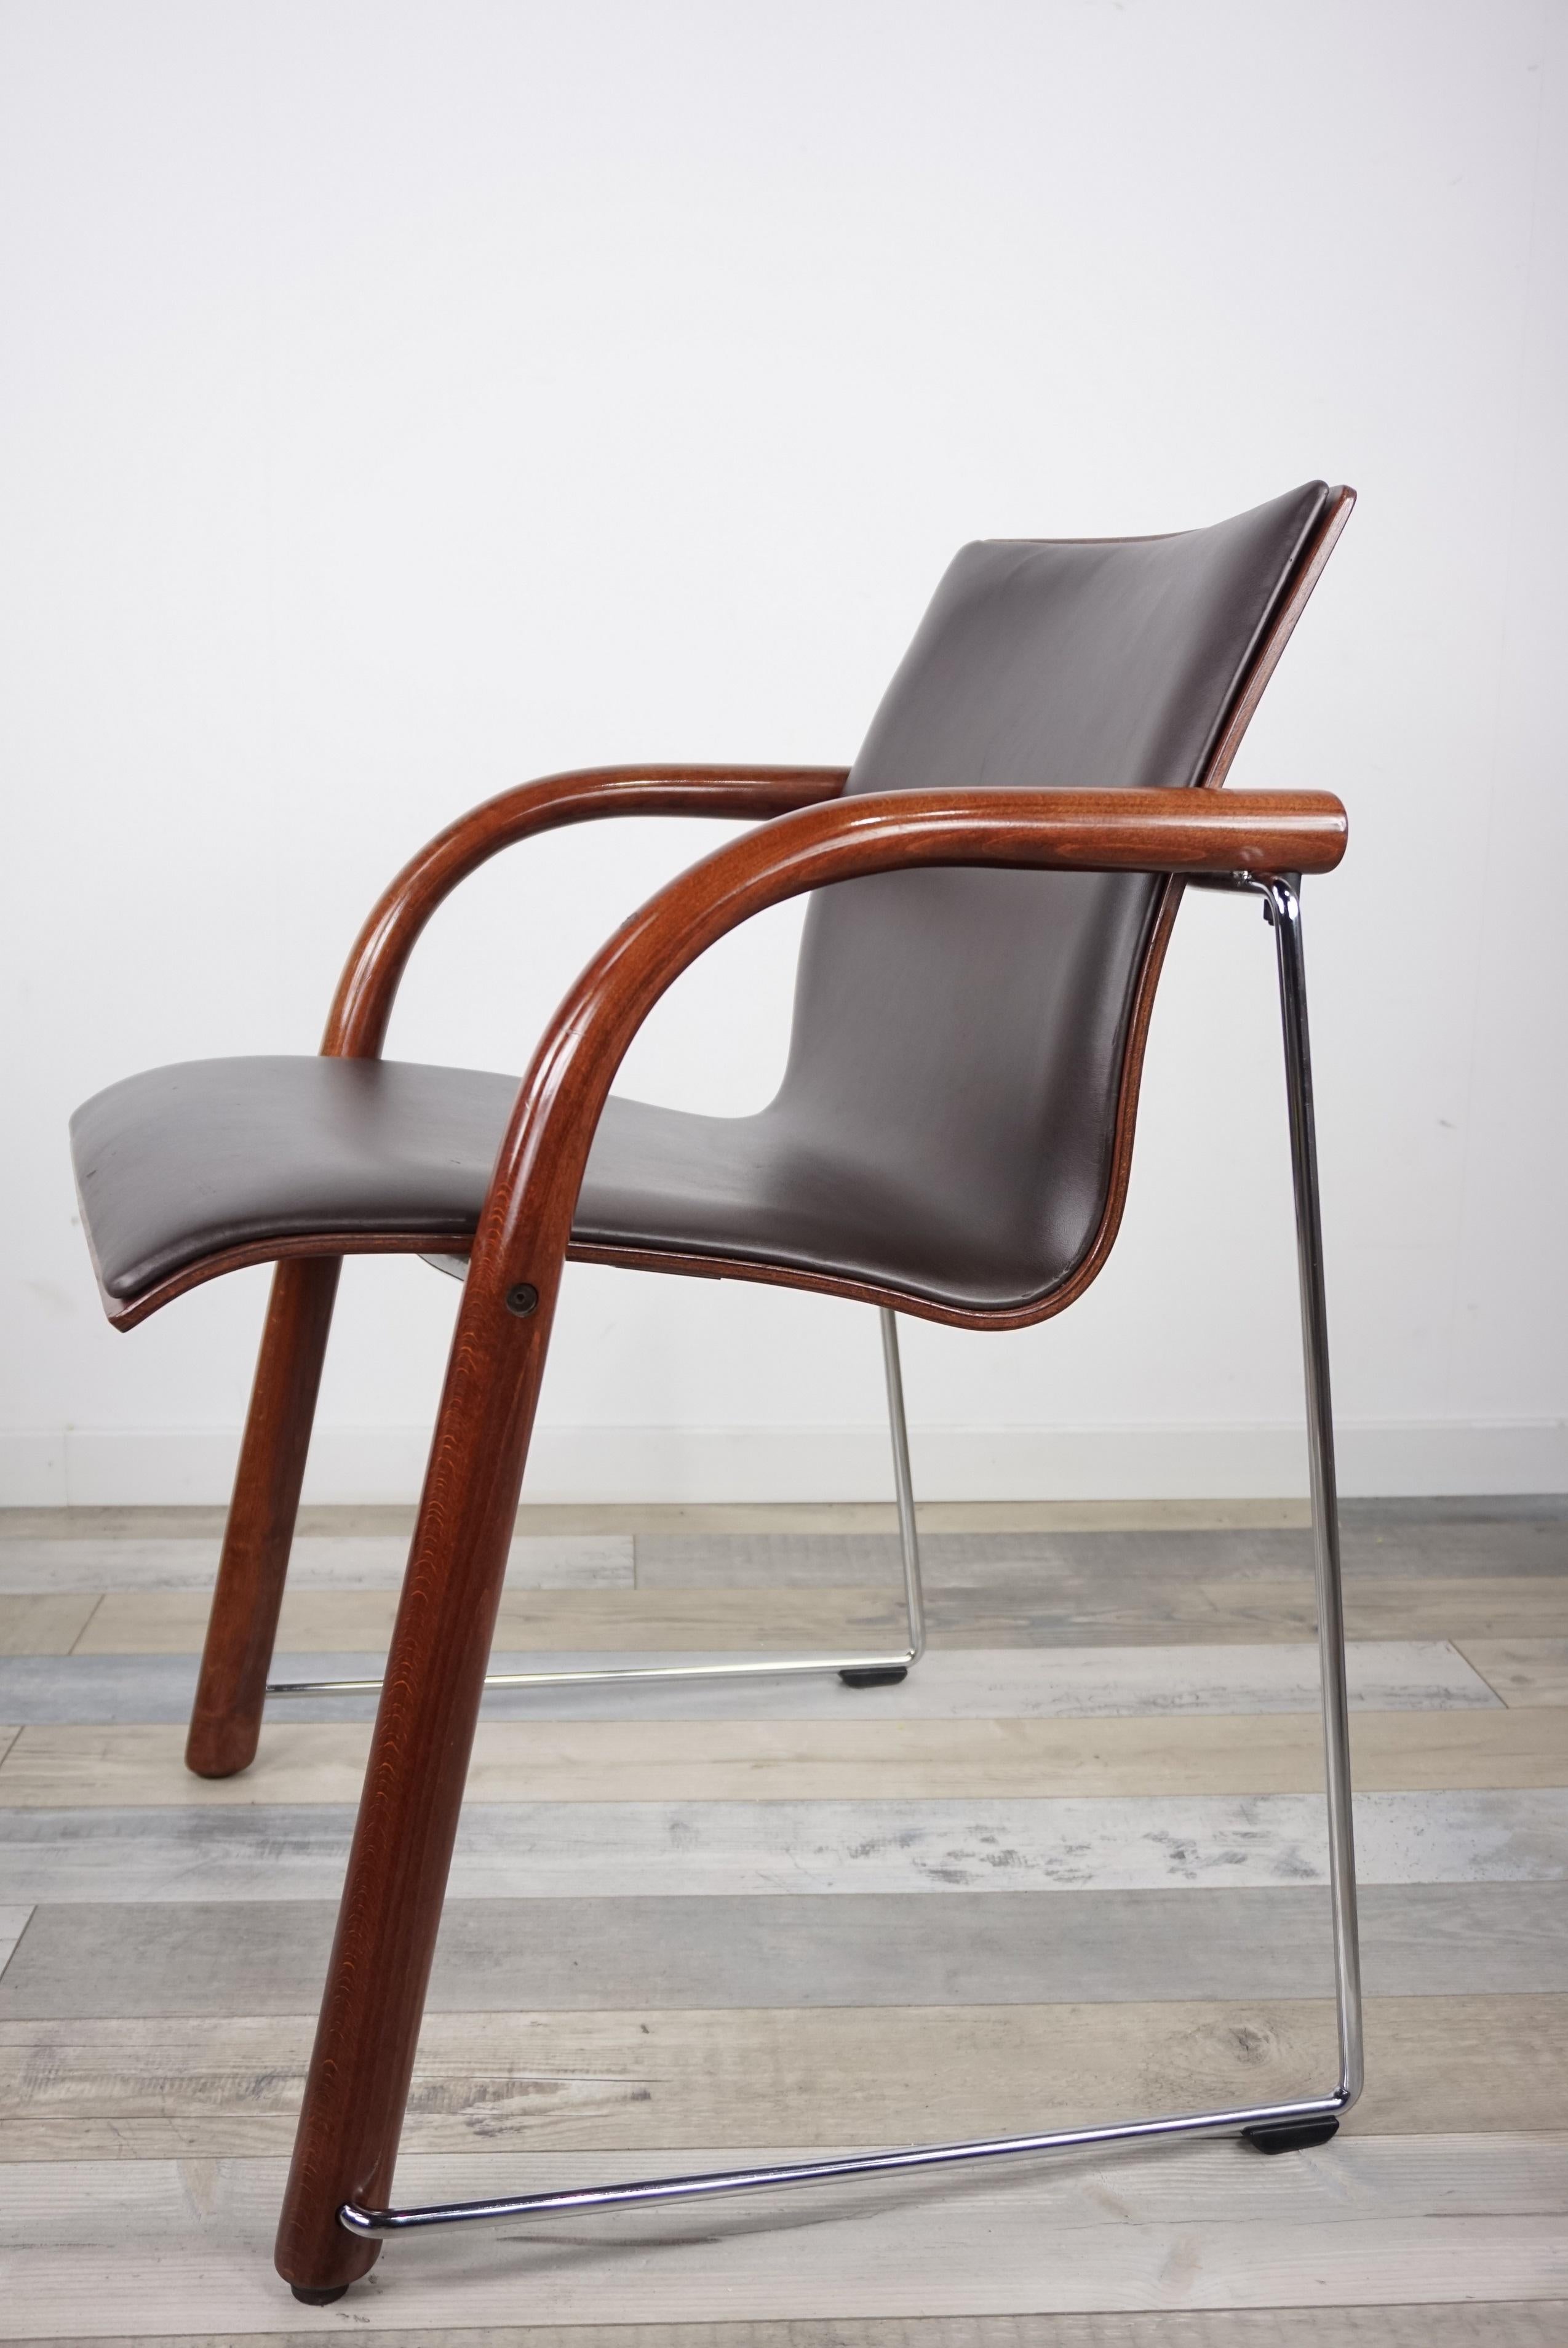 This S320 armchair is a creation of Ulrich Böhme and Wulf Schneider (German architects and designers many times rewarded for their innovative creations) in 1984 for the famous Thonet house. With amazing work, the S320 range will become a Classic